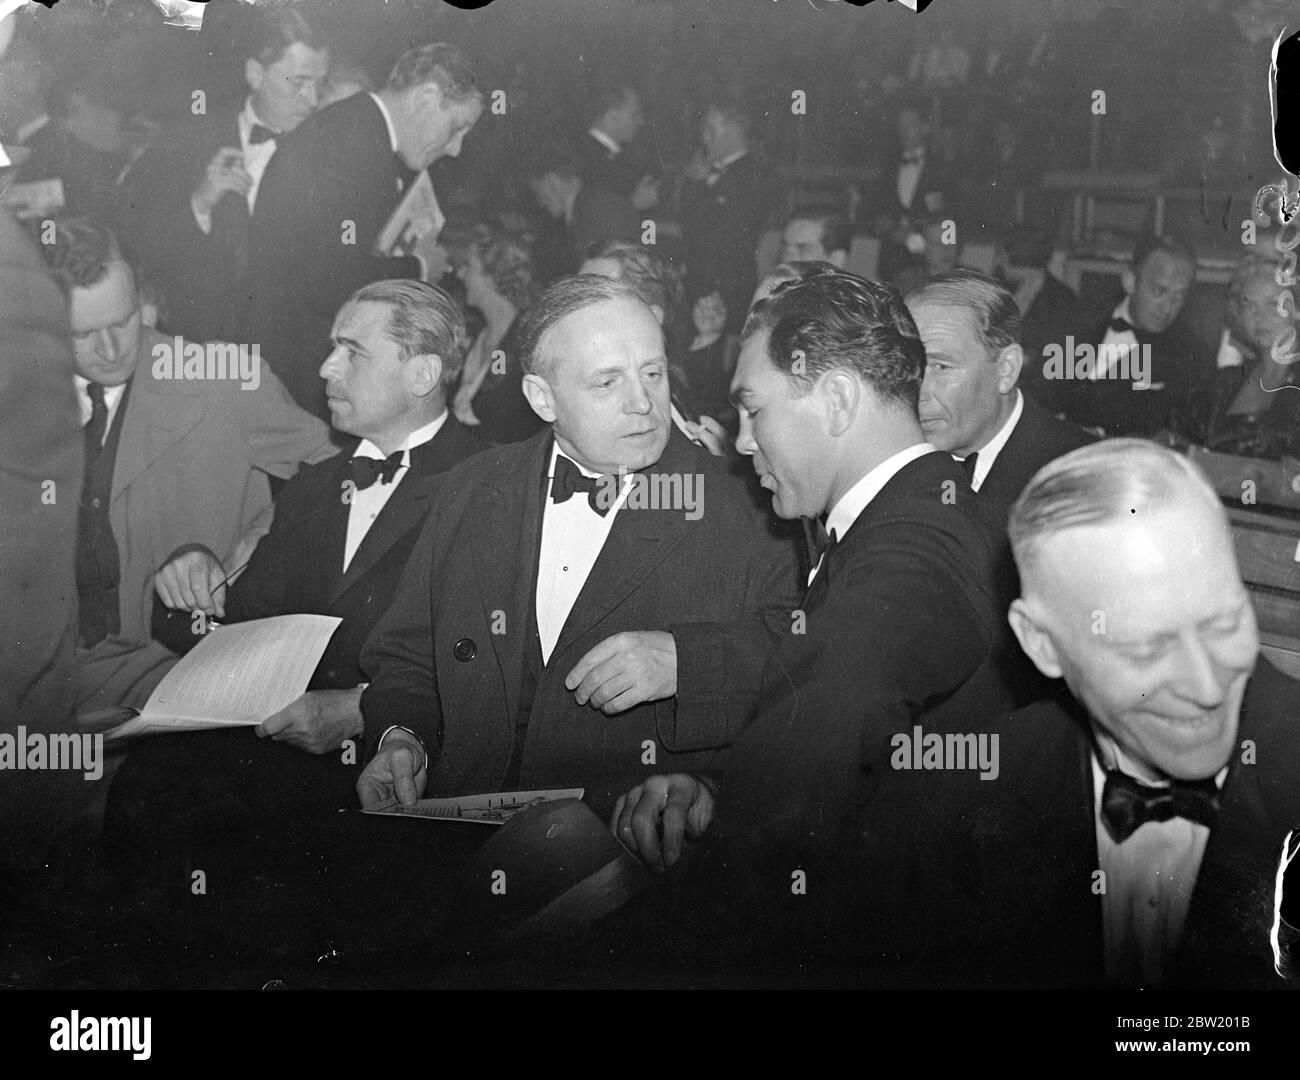 Max Schmeling and German Ambassador, von Ribbentrop, see Farr's knockout victory over Neusel. Max Schmeling, the German heavyweight with whom it is possible the Welshman will be matched, watched Tommy Farr, knock out his countryman, Walter Neusel, in the third round of the match at the Harringay Arena, London. Photo shows: Max Schmeling talking with the German Ambassador, Herr Joachim von Ribbentrop, at the ringside 15 June 1937 Stock Photo